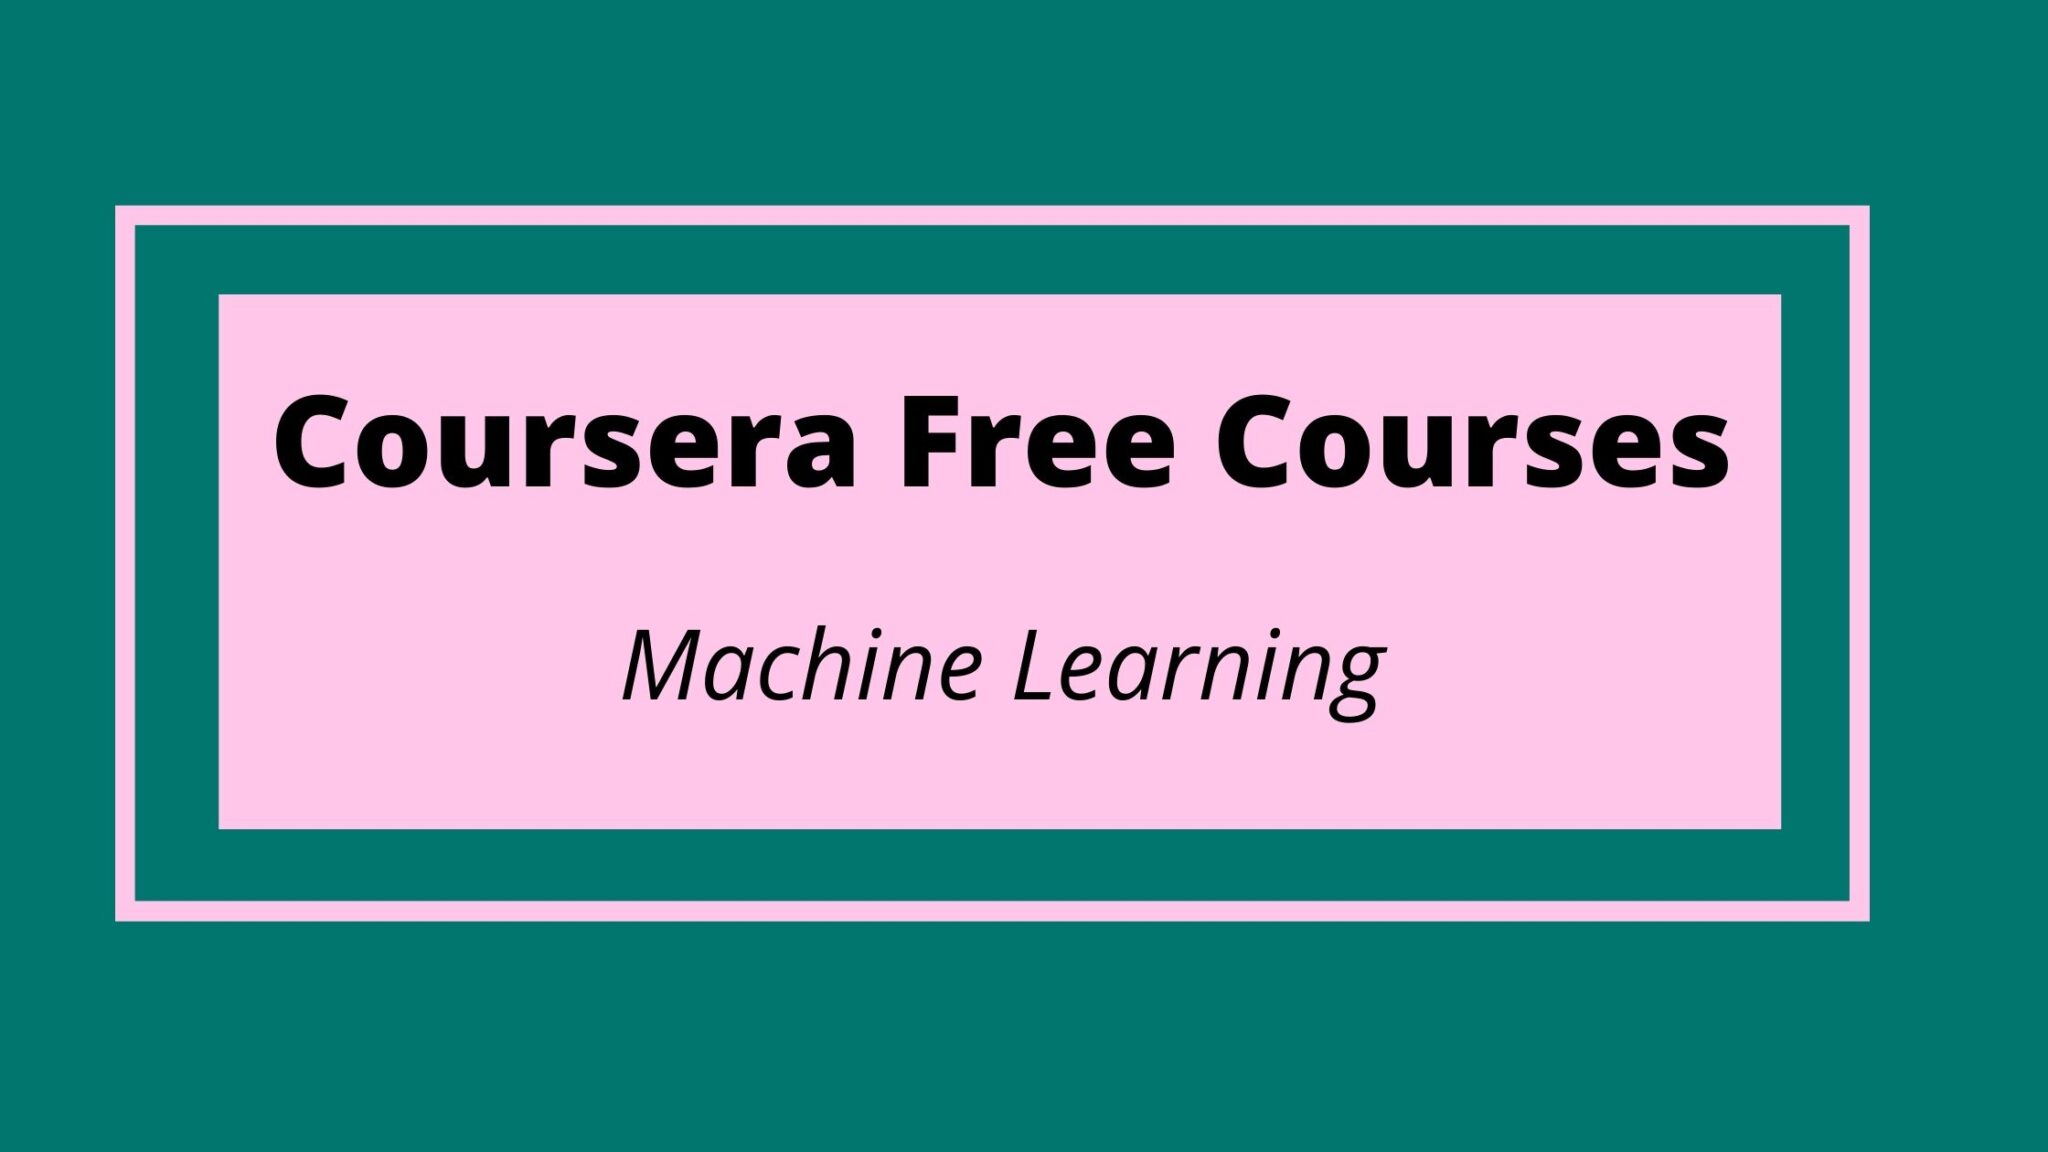 12 Coursera Free Courses Machine Learning for Everyone in 2022